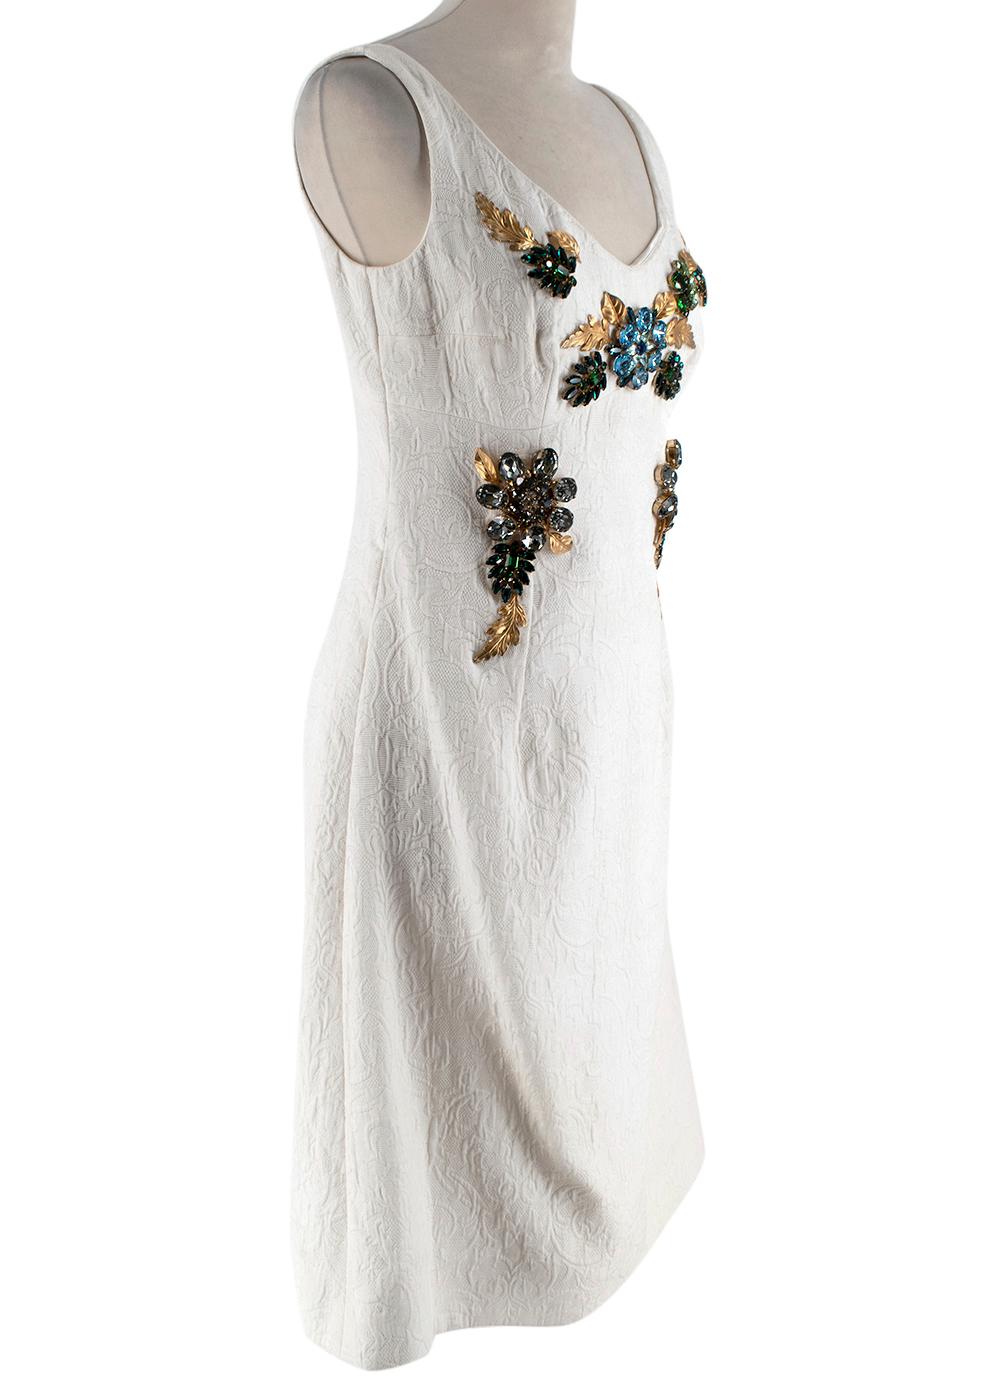 Dolce & Gabbana Cream Textured Jewel Embellished Dress

- Fabric textured with raised pattern
- Gold metal leaves and blue and green jewels embroidered to front 
- V neck
- A-line skirt
- Zip fastening down centre back
- Fully